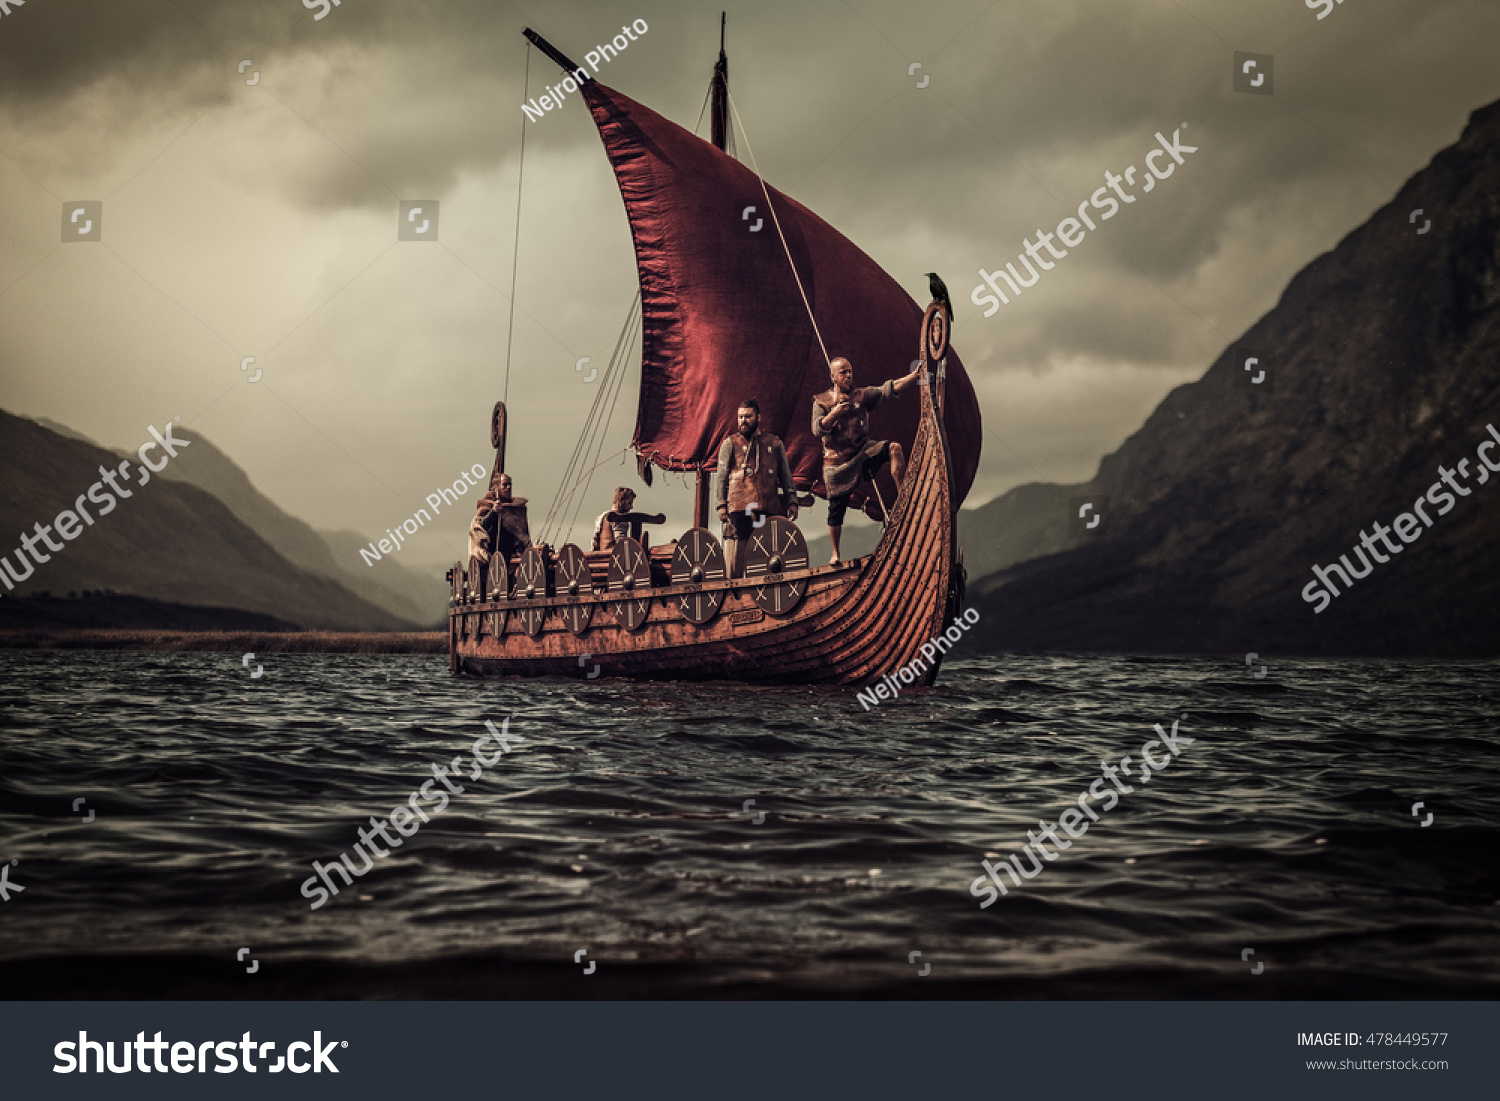 Group of vikings are floating on the sea on Drakkar with mountains on the background. #478449577